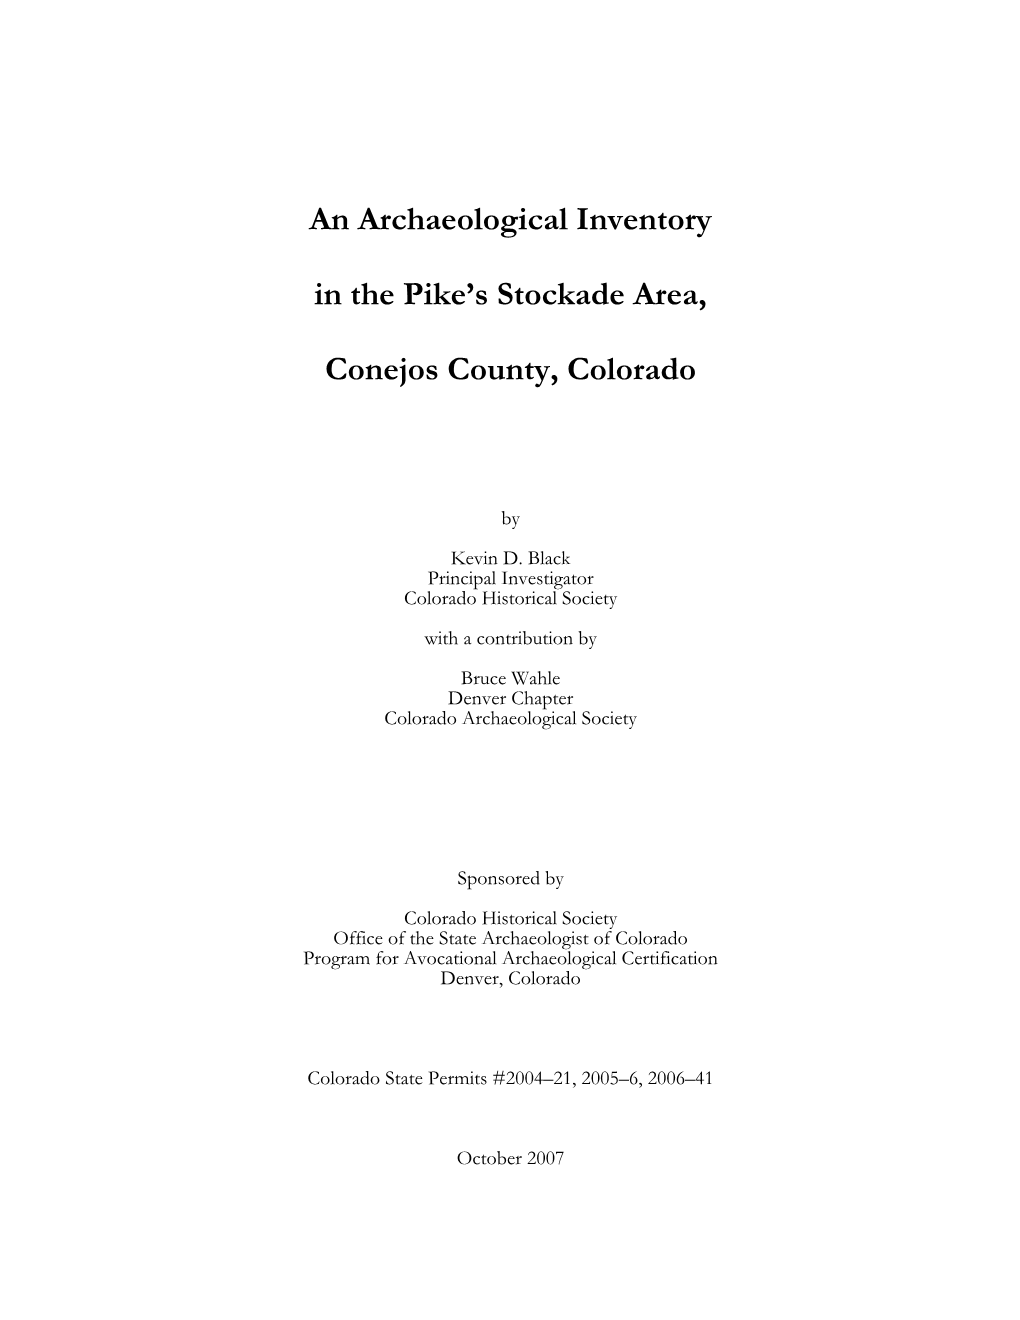 An Archaeological Inventory in the Pike's Stockade Area, Conejos